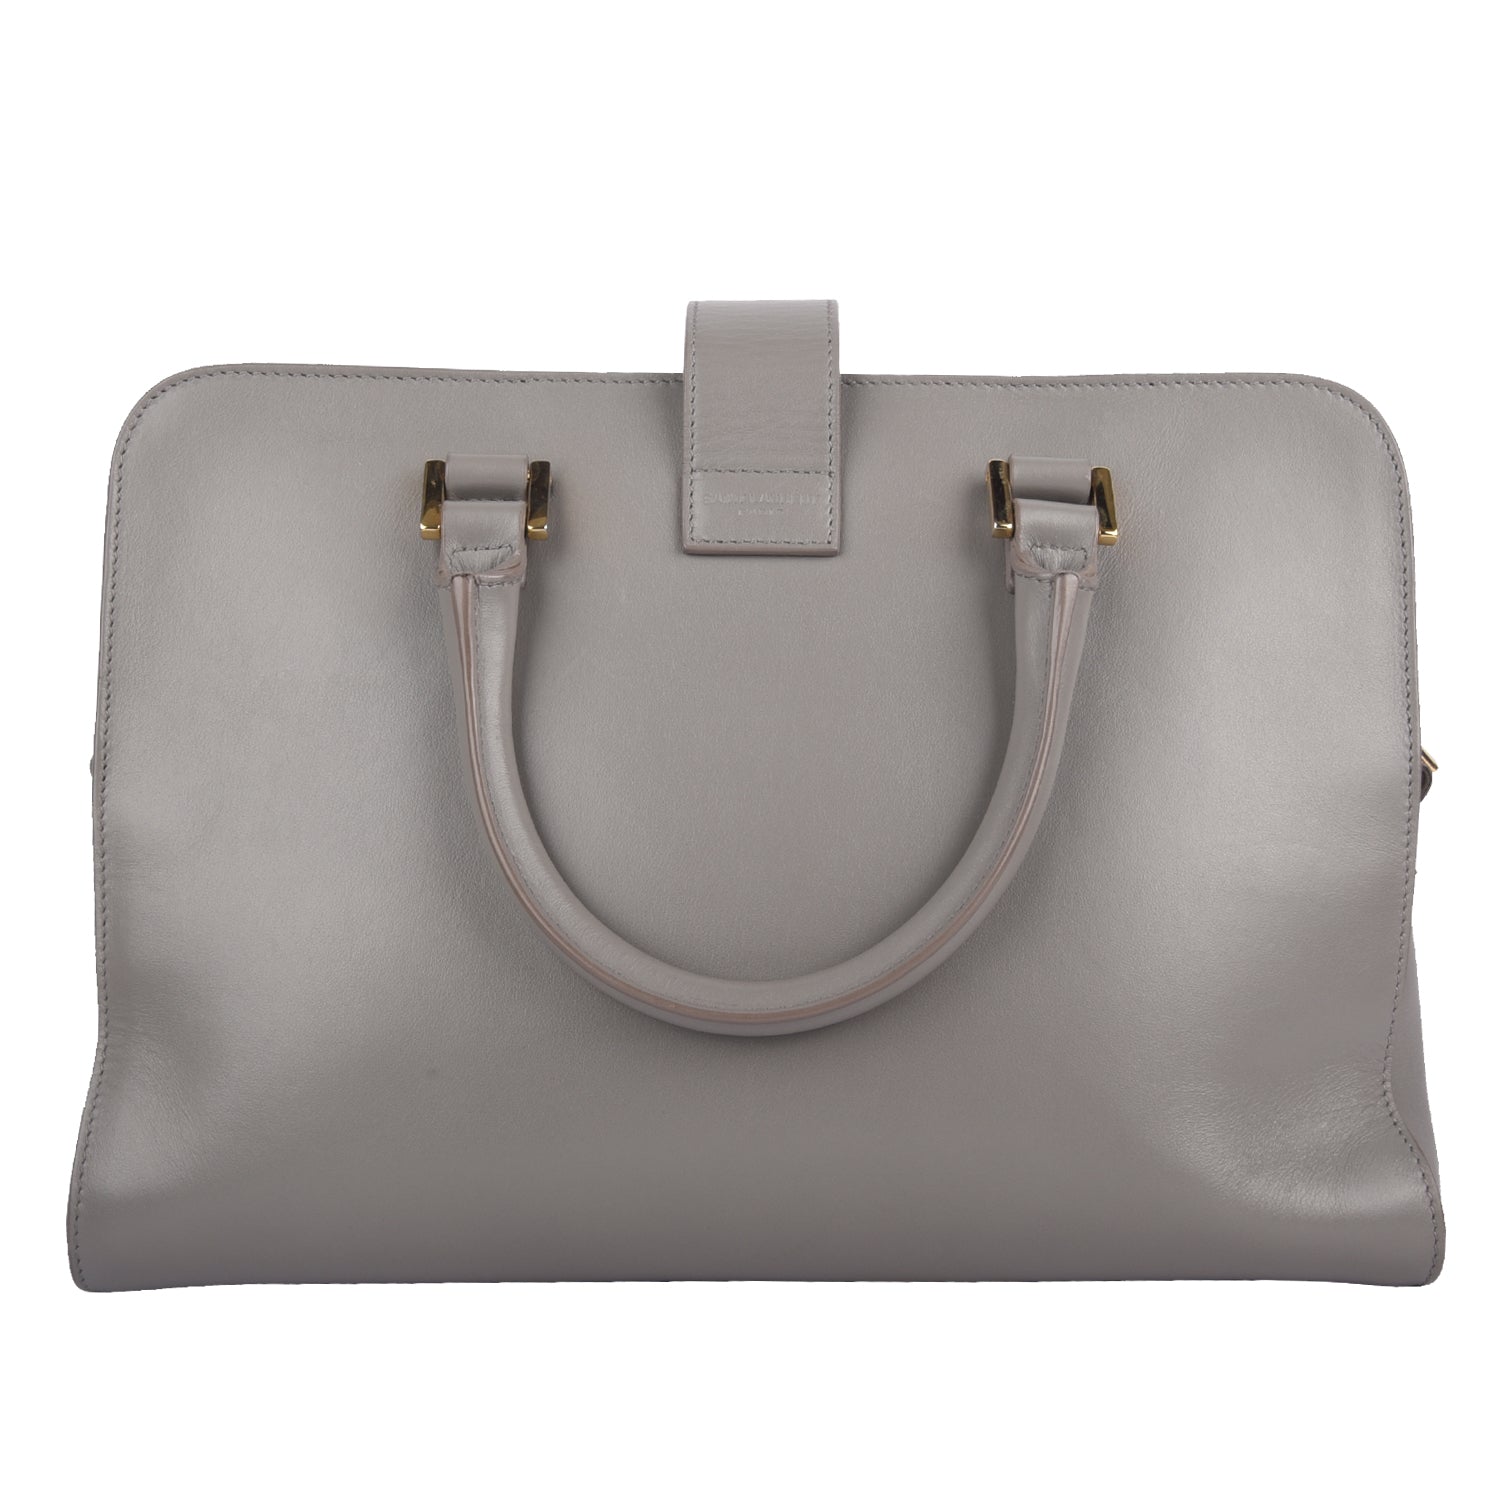 Monogram Cabas Grey Leather Small Tote